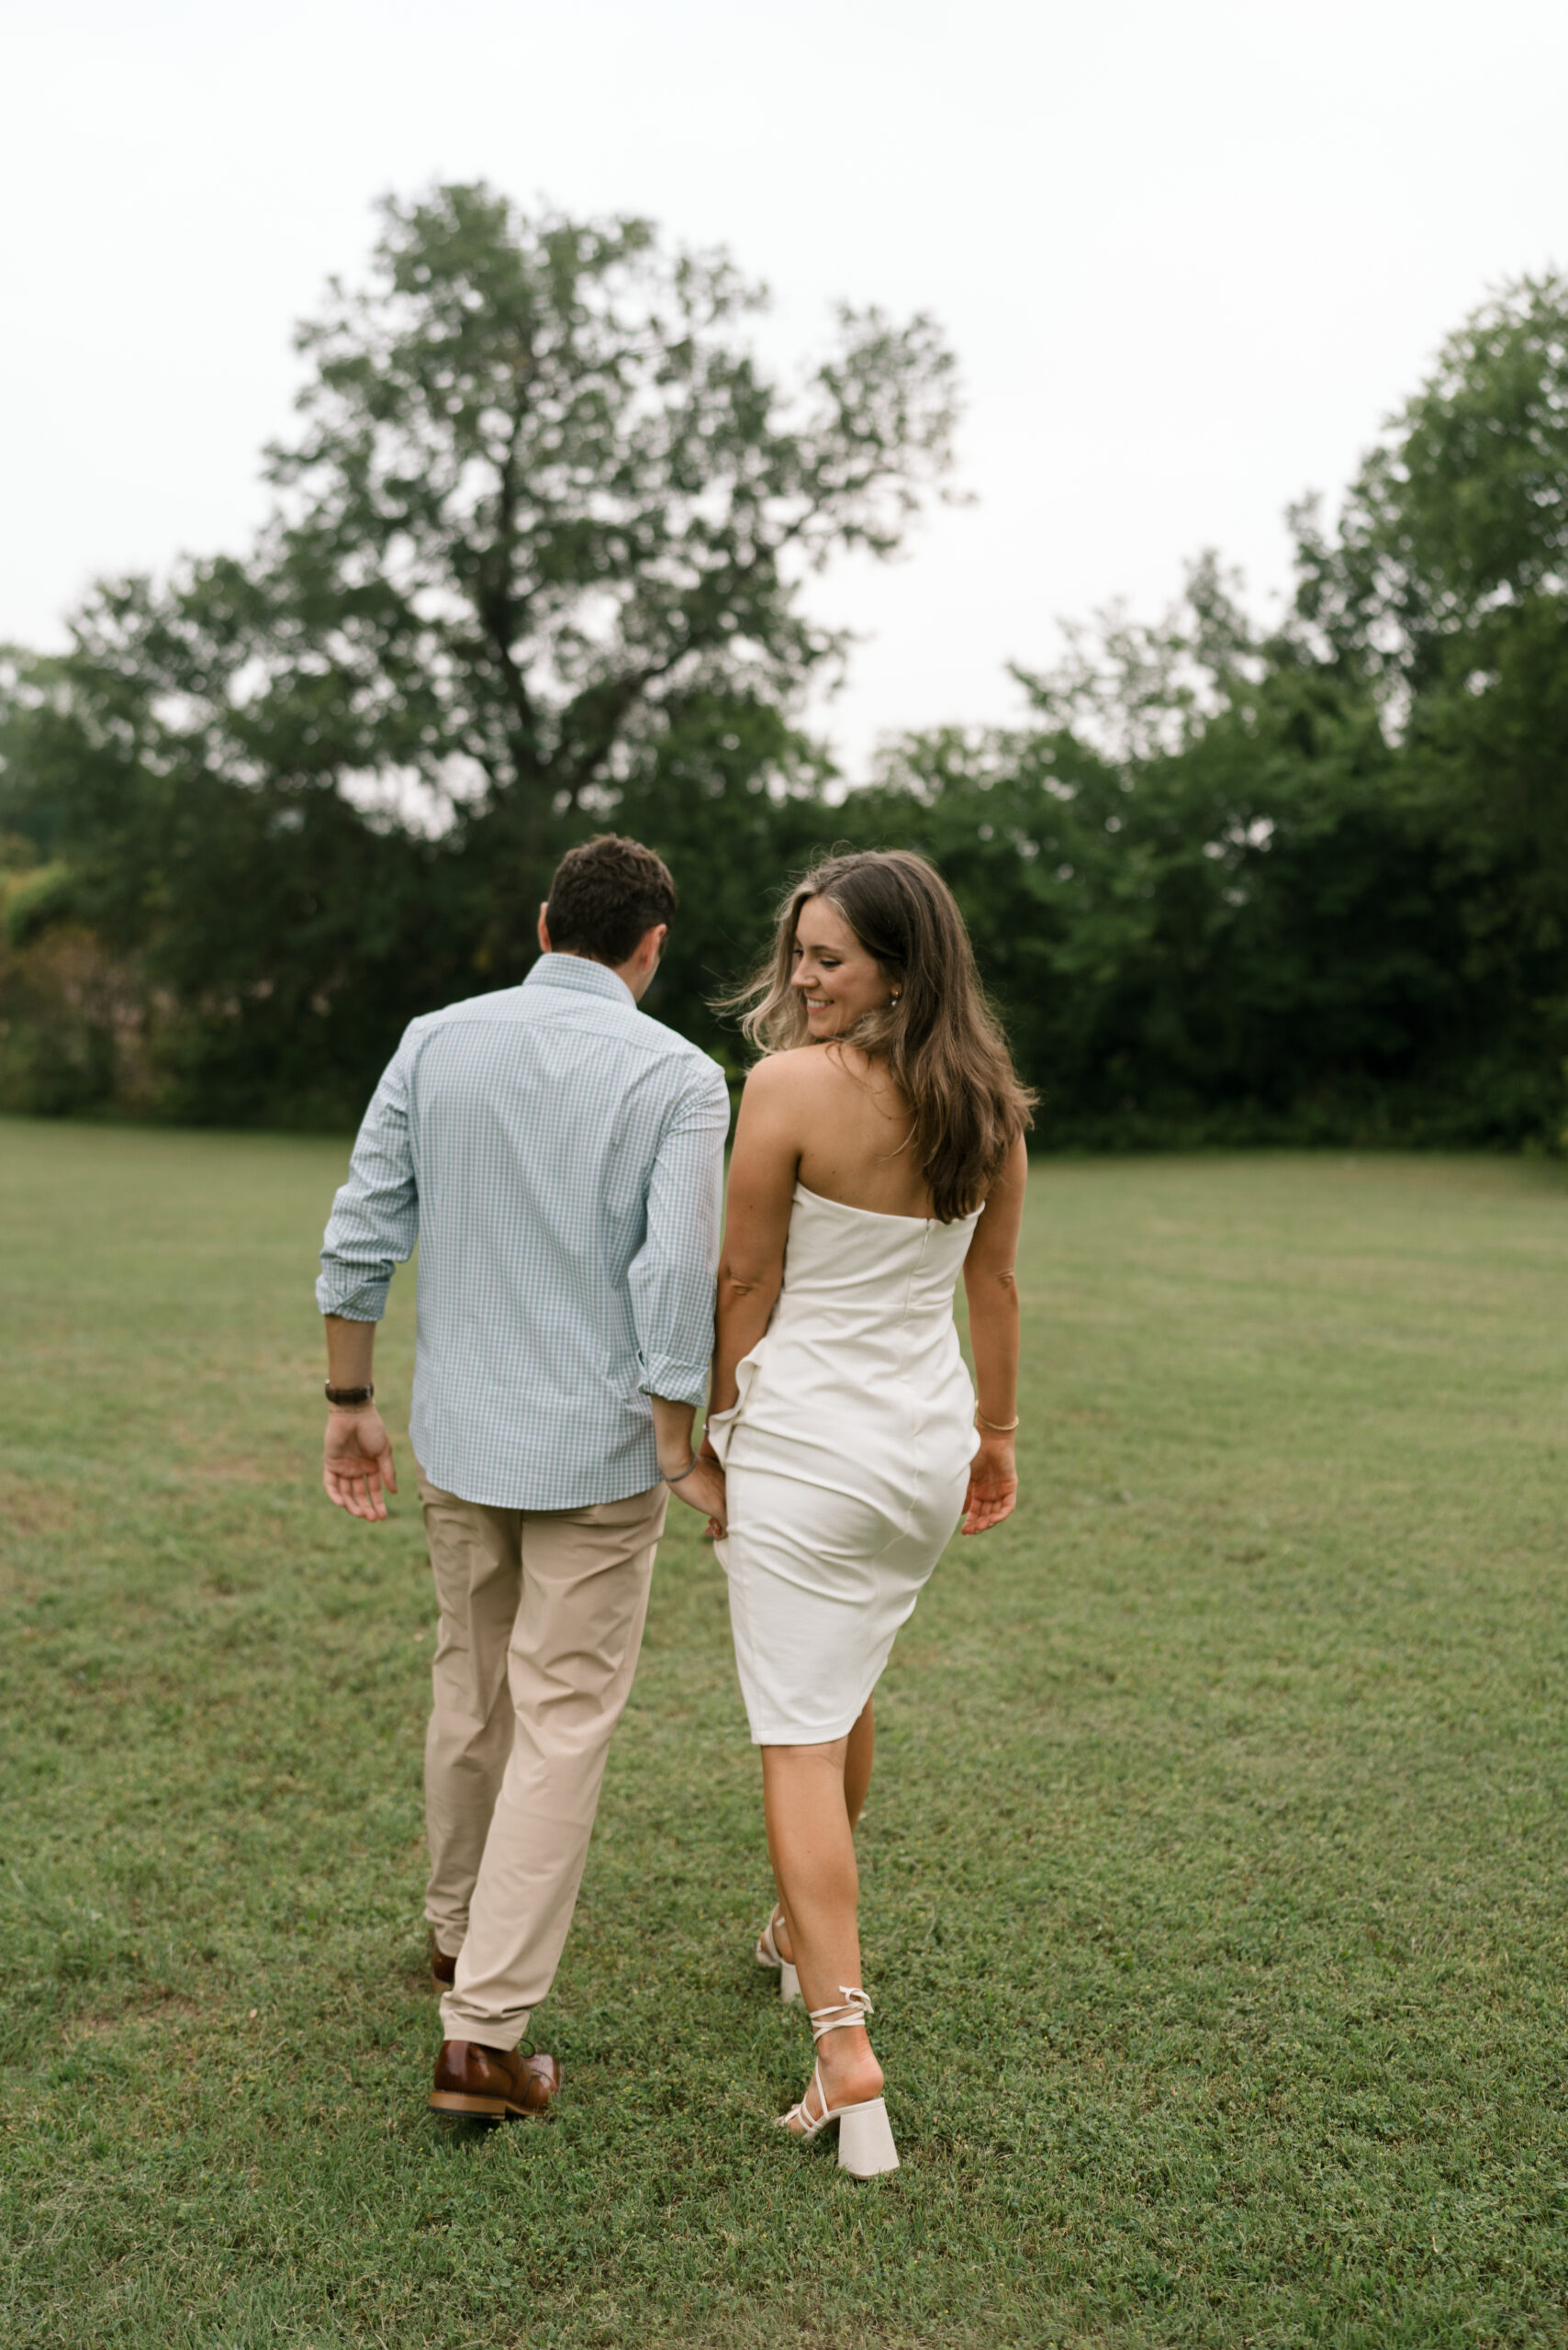 A couple, bride and groom, walk away from the camera during their rehearsal dinner. She is wearing a white dress and he is wearing. ablue shirt.